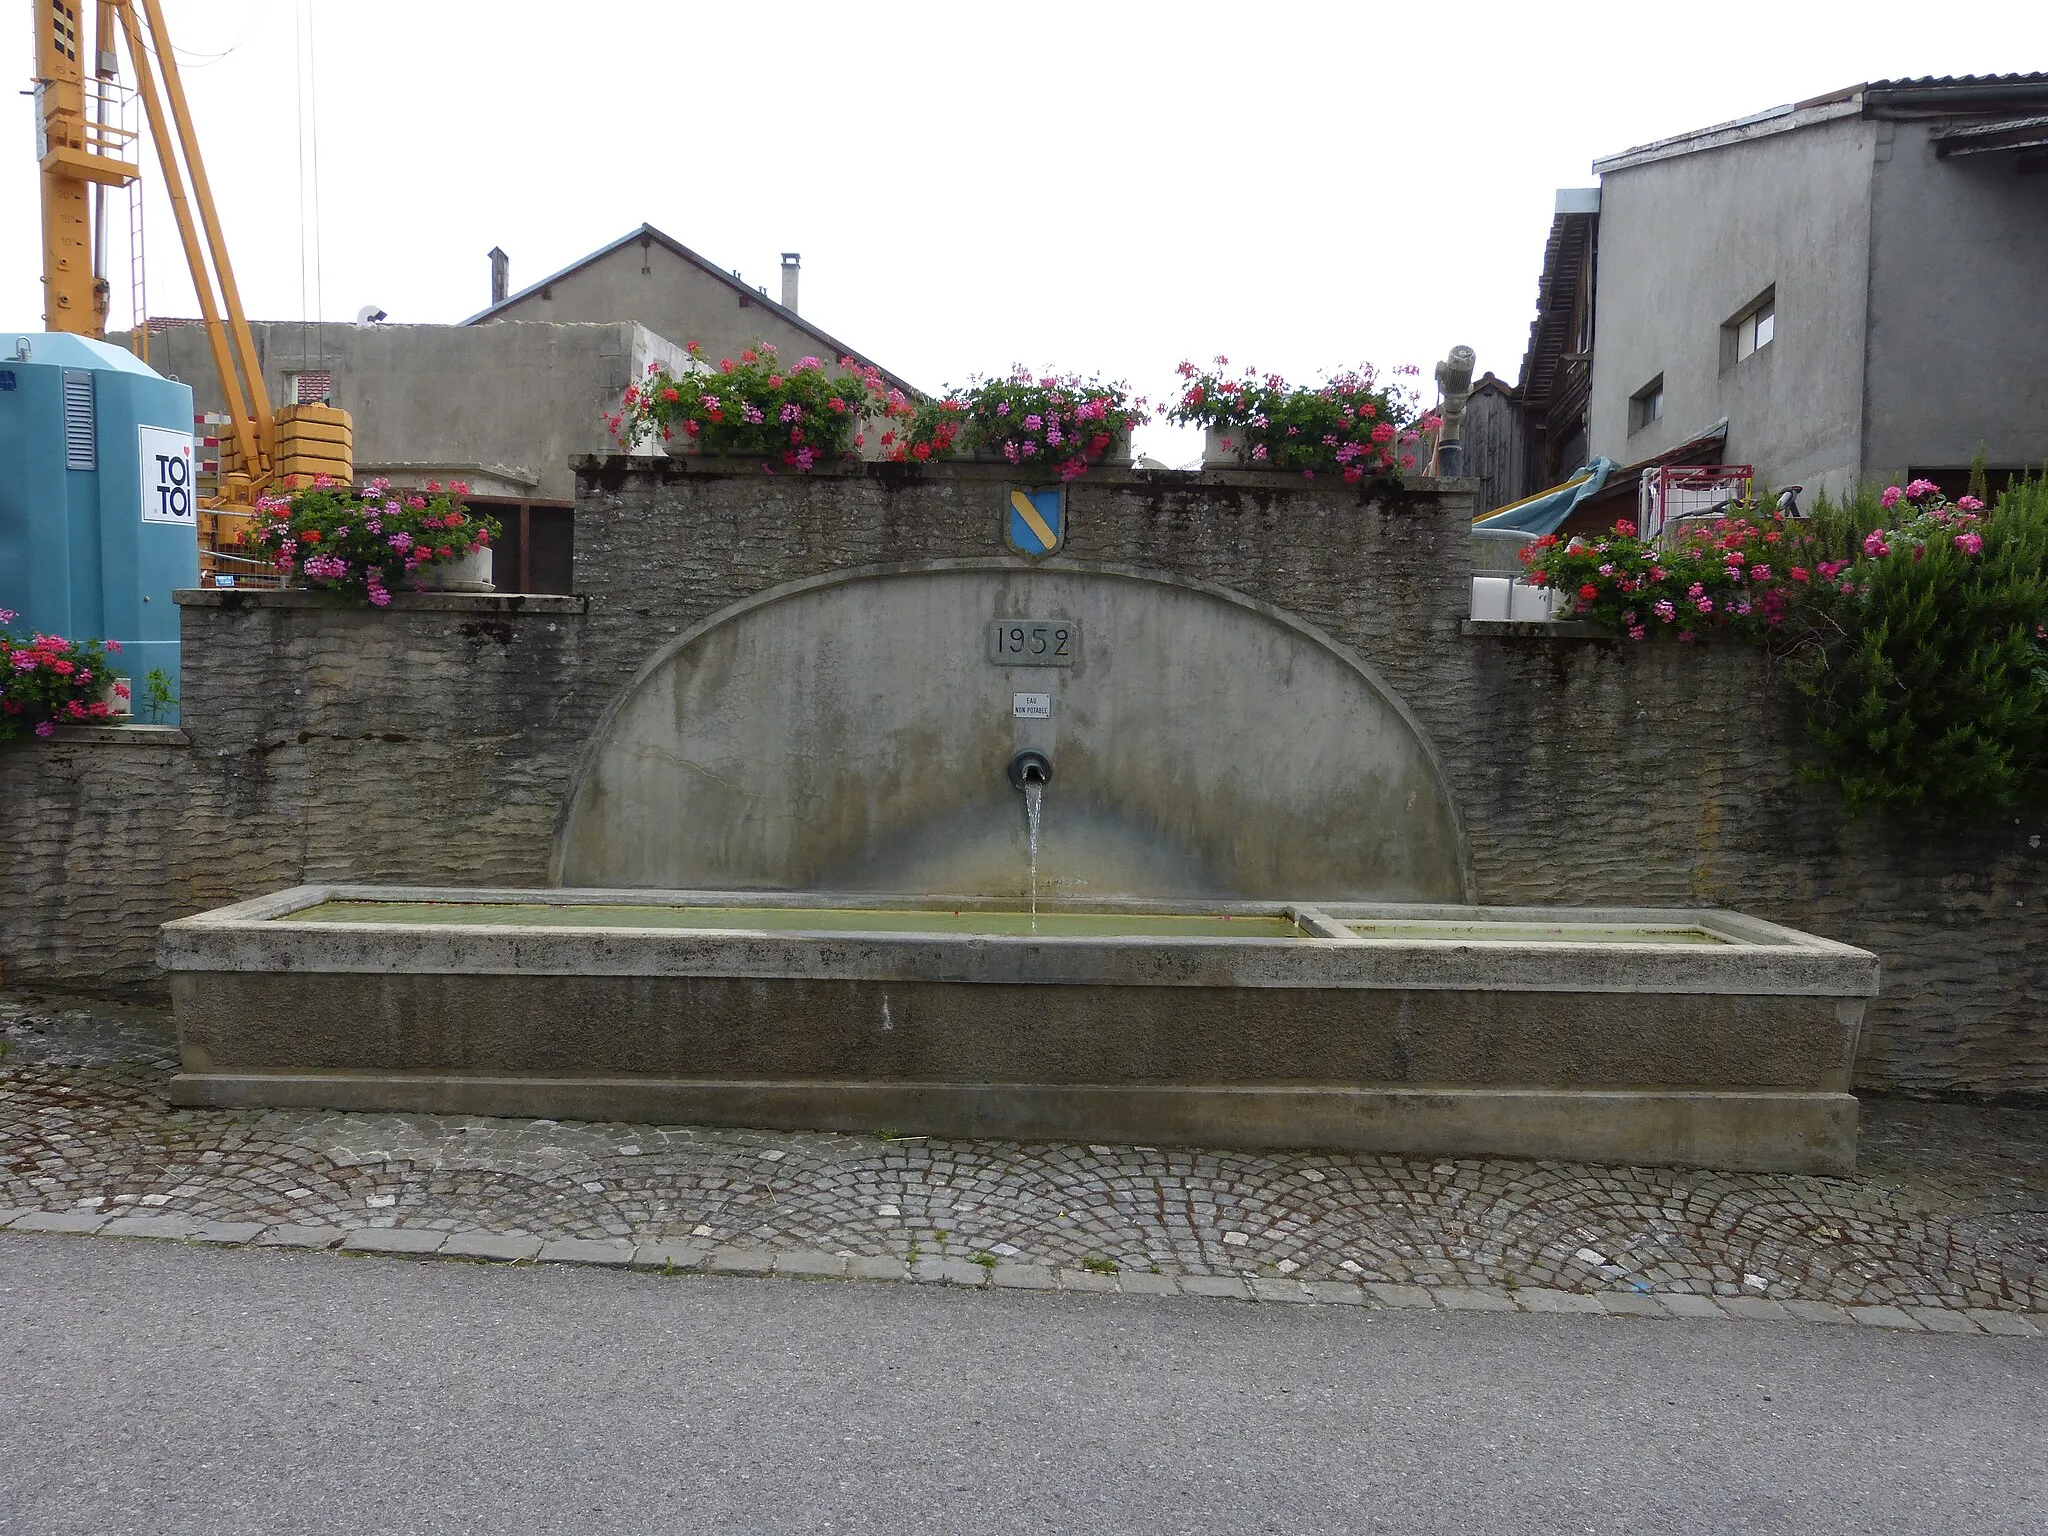 Photo showing: A fountains in the village of Bournens.